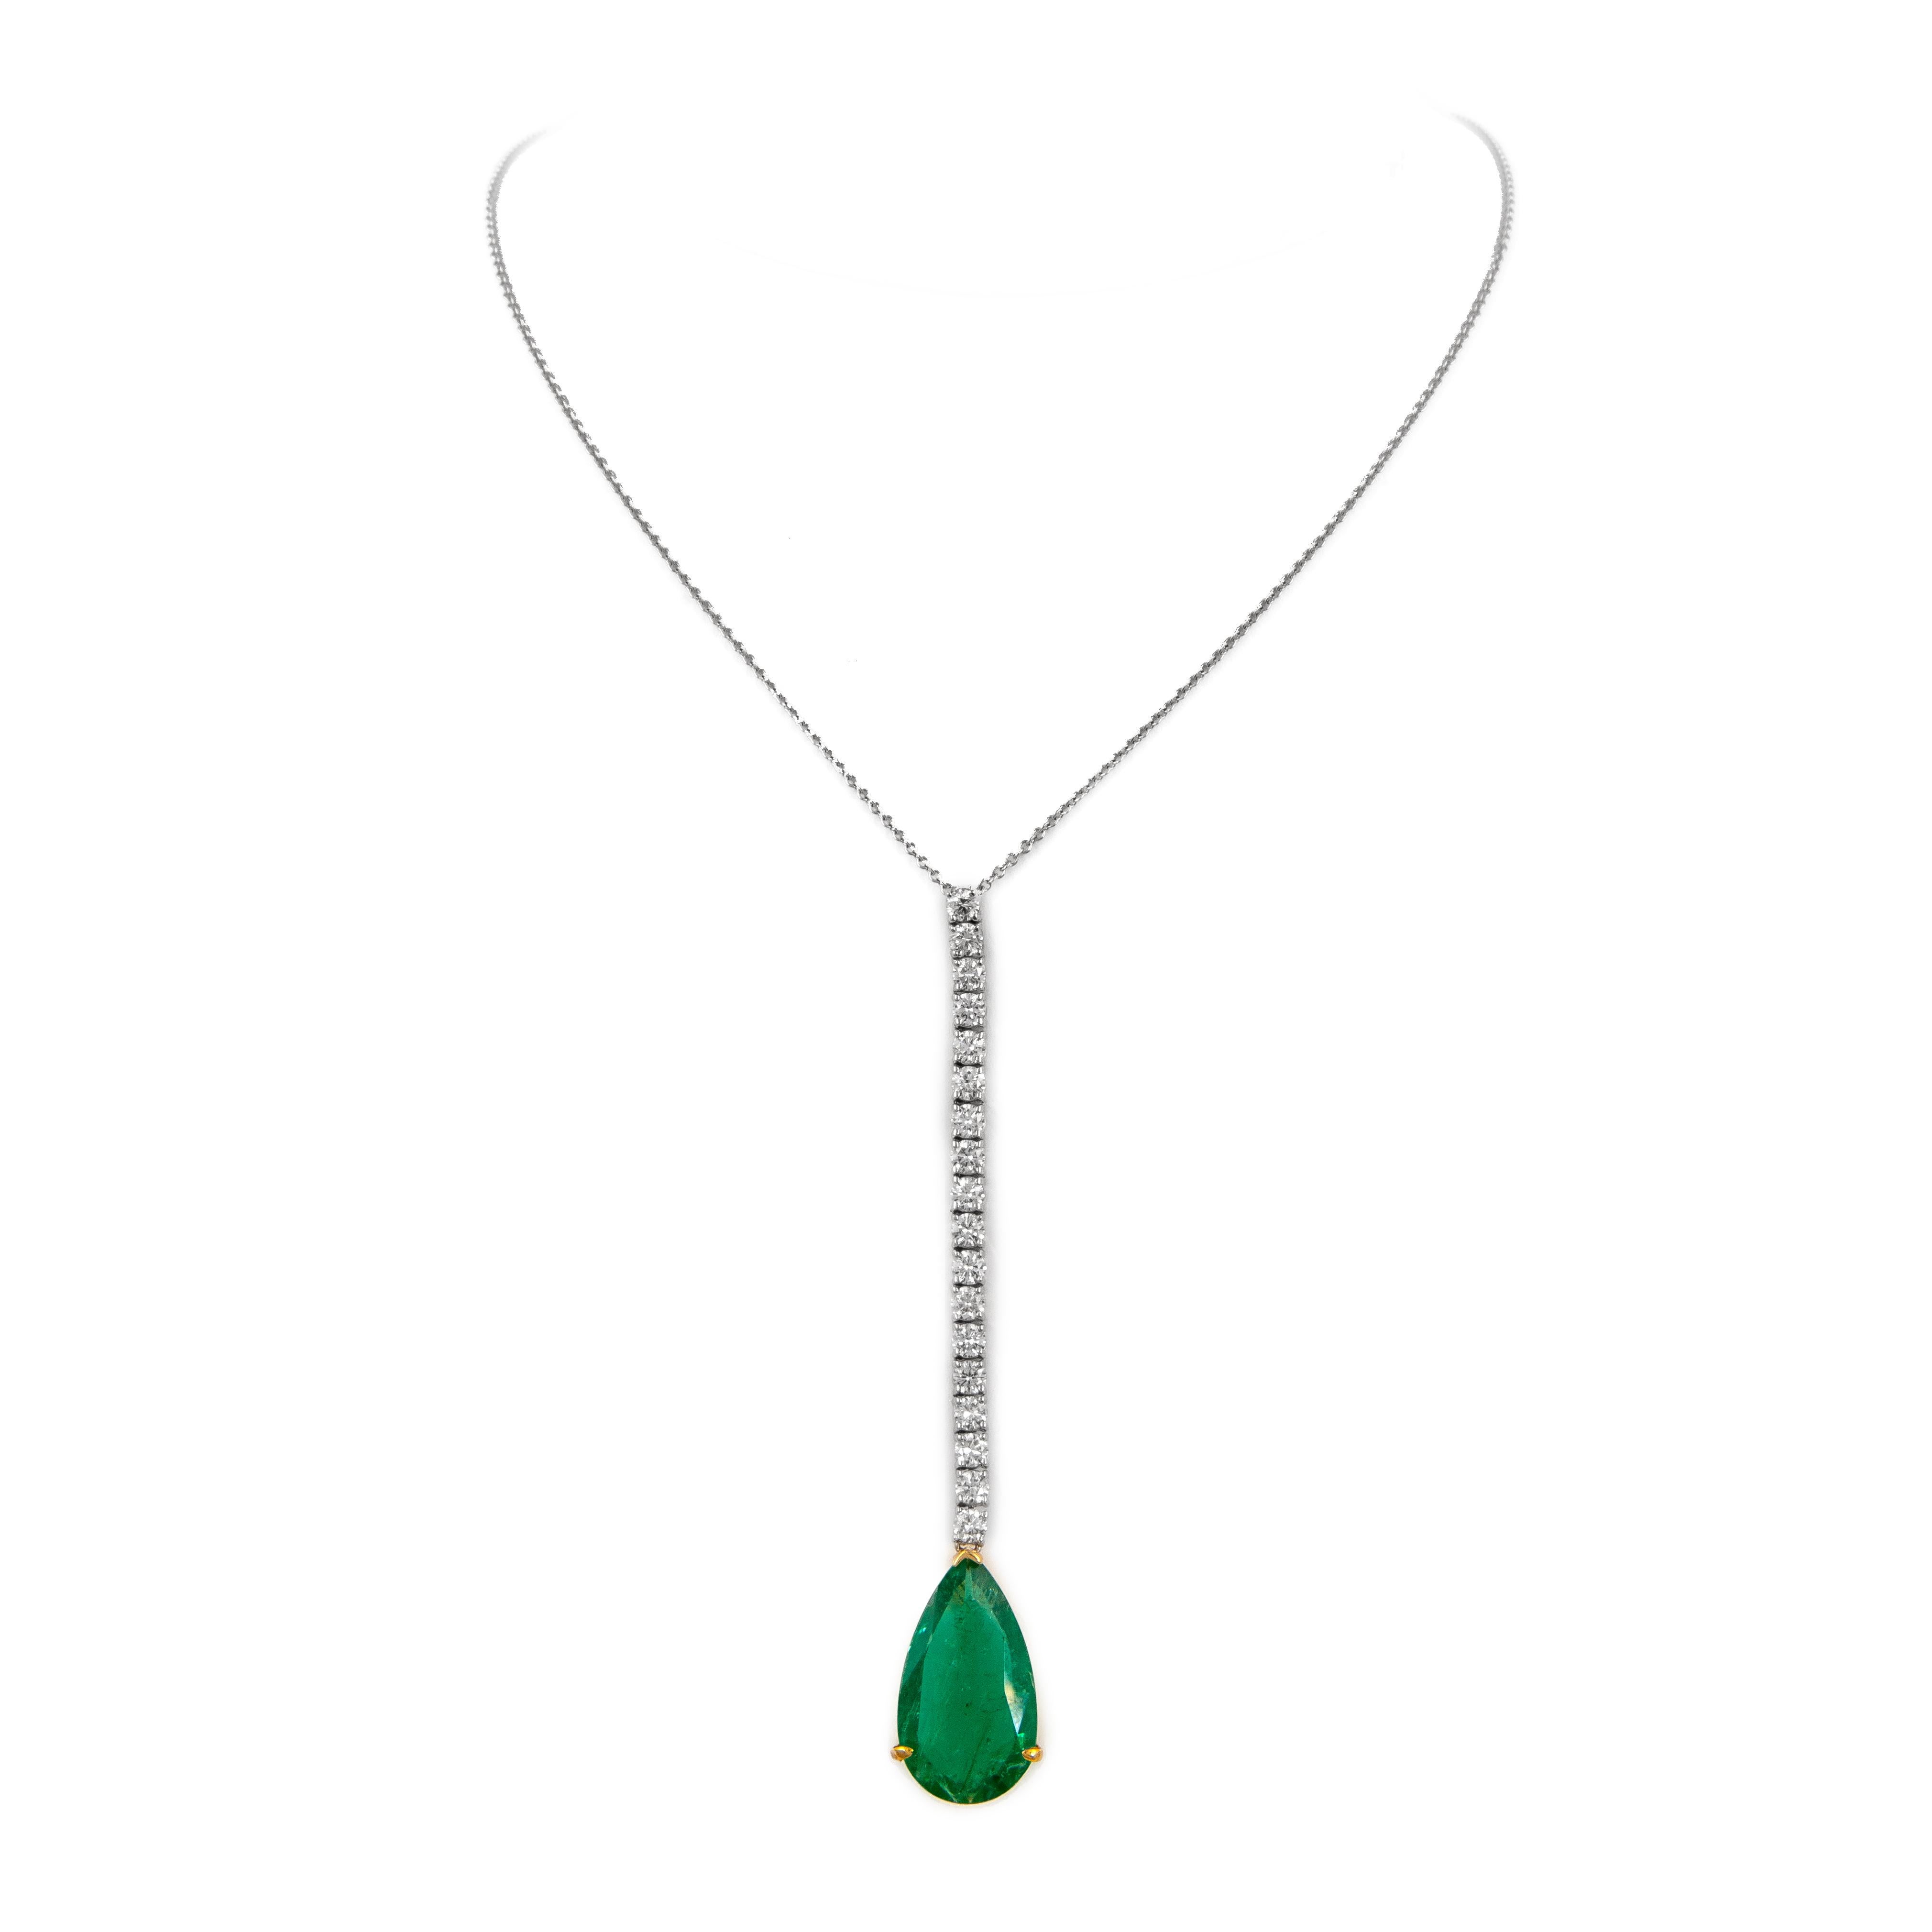 Lovely emerald and diamond drop necklace.
22.32 carats total gemstone weight.
20.16 carat oval emerald, apx F2. 18 round brilliant diamonds, 2.16 carats. Approximately H/I color and VS2/SI1 clarity. 18-karat white gold, 8.71 grams,